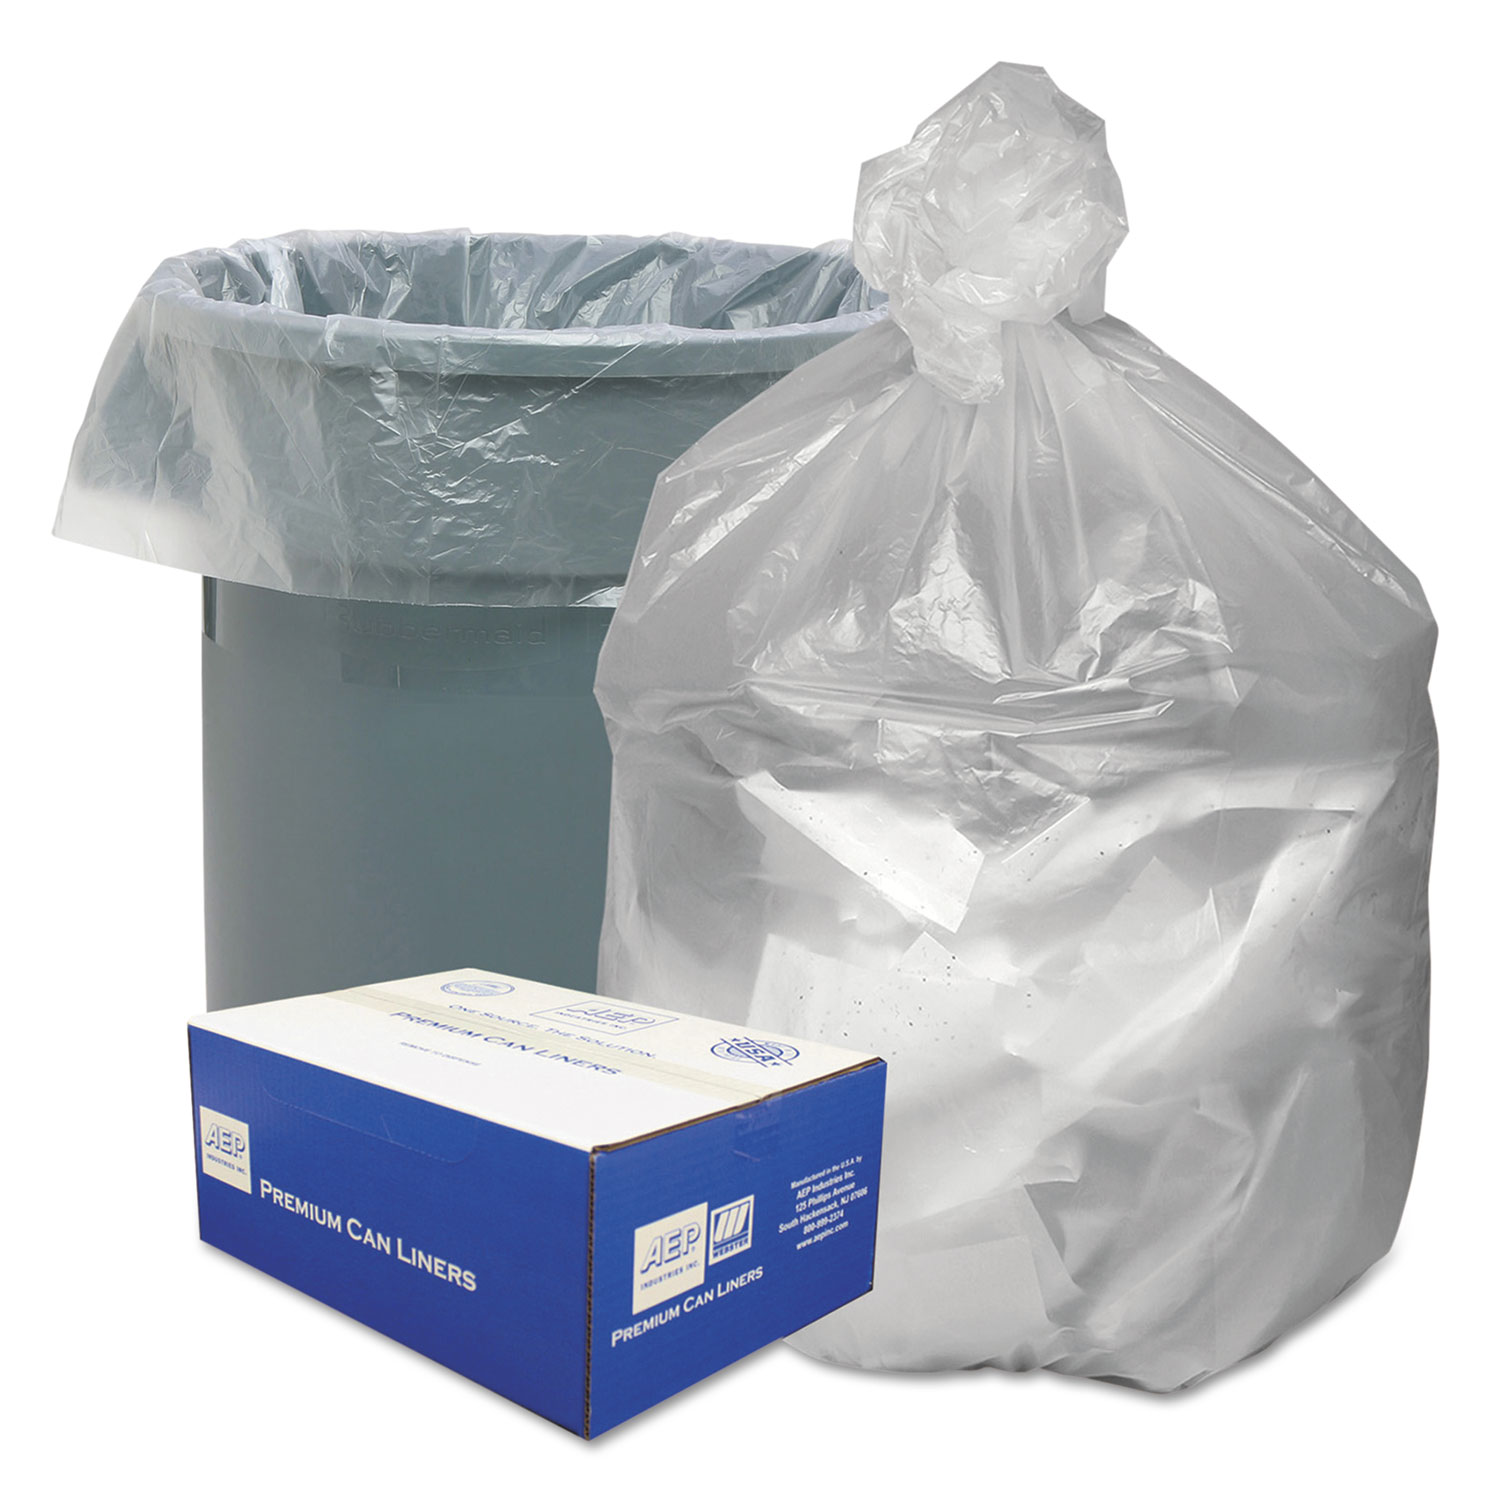  Good 'n Tuff GNT4048 Waste Can Liners, 45 gal, 10 microns, 40 x 46, Natural, 250/Carton (WBIGNT4048) 